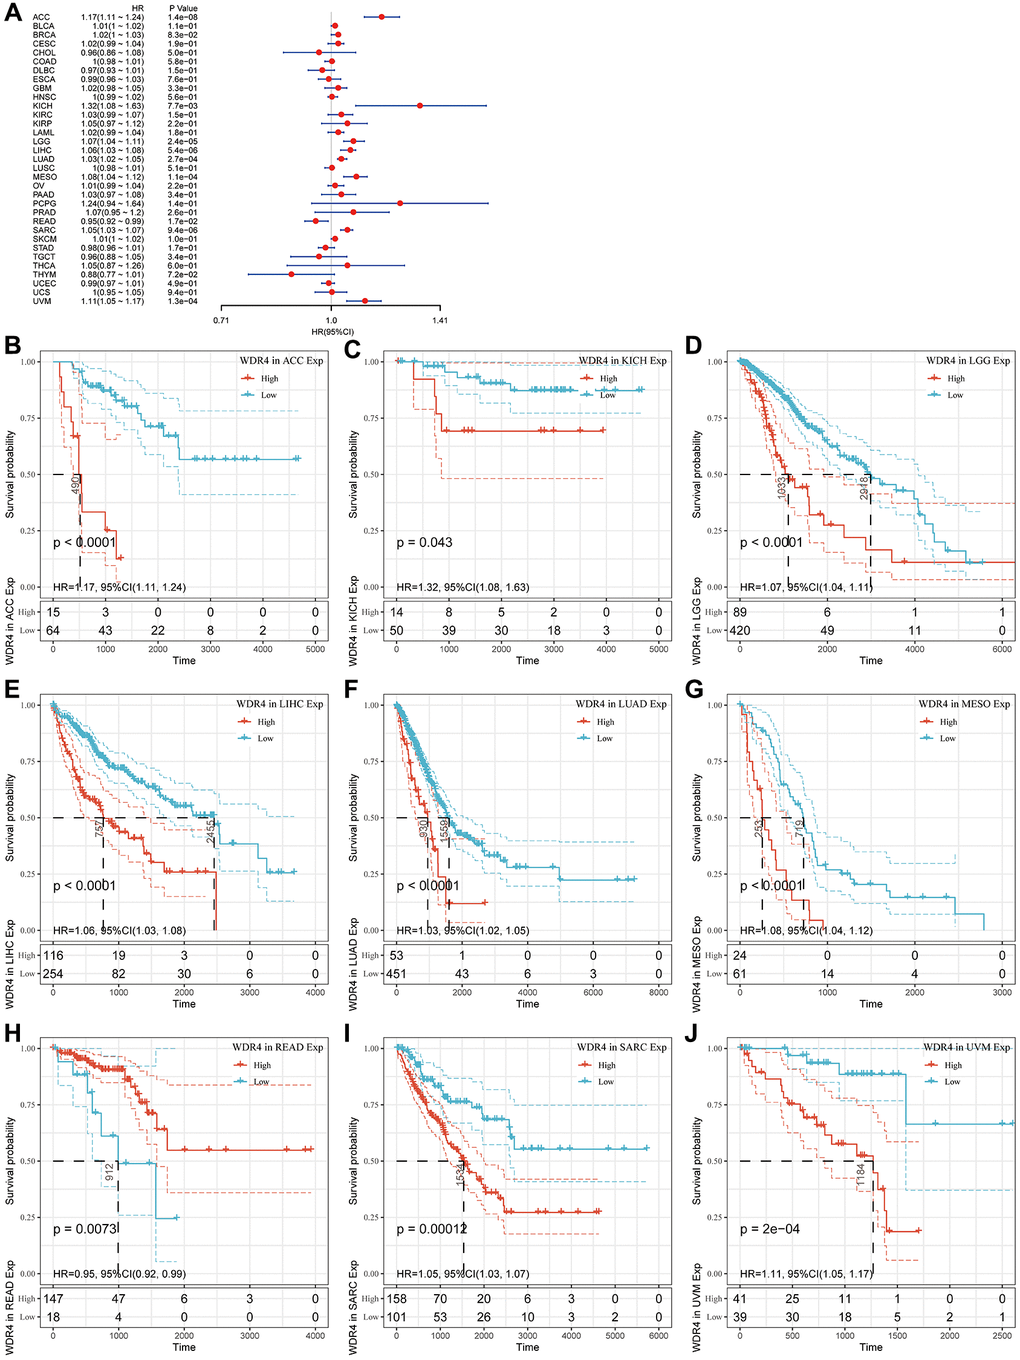 Association of WDR4 expression with patient overall survival (OS). (A) The forest plot shows the relationship of WDR4 expression with patient OS. (B–J) Kaplan-Meier analyses show the association between WDR4 expression and OS.